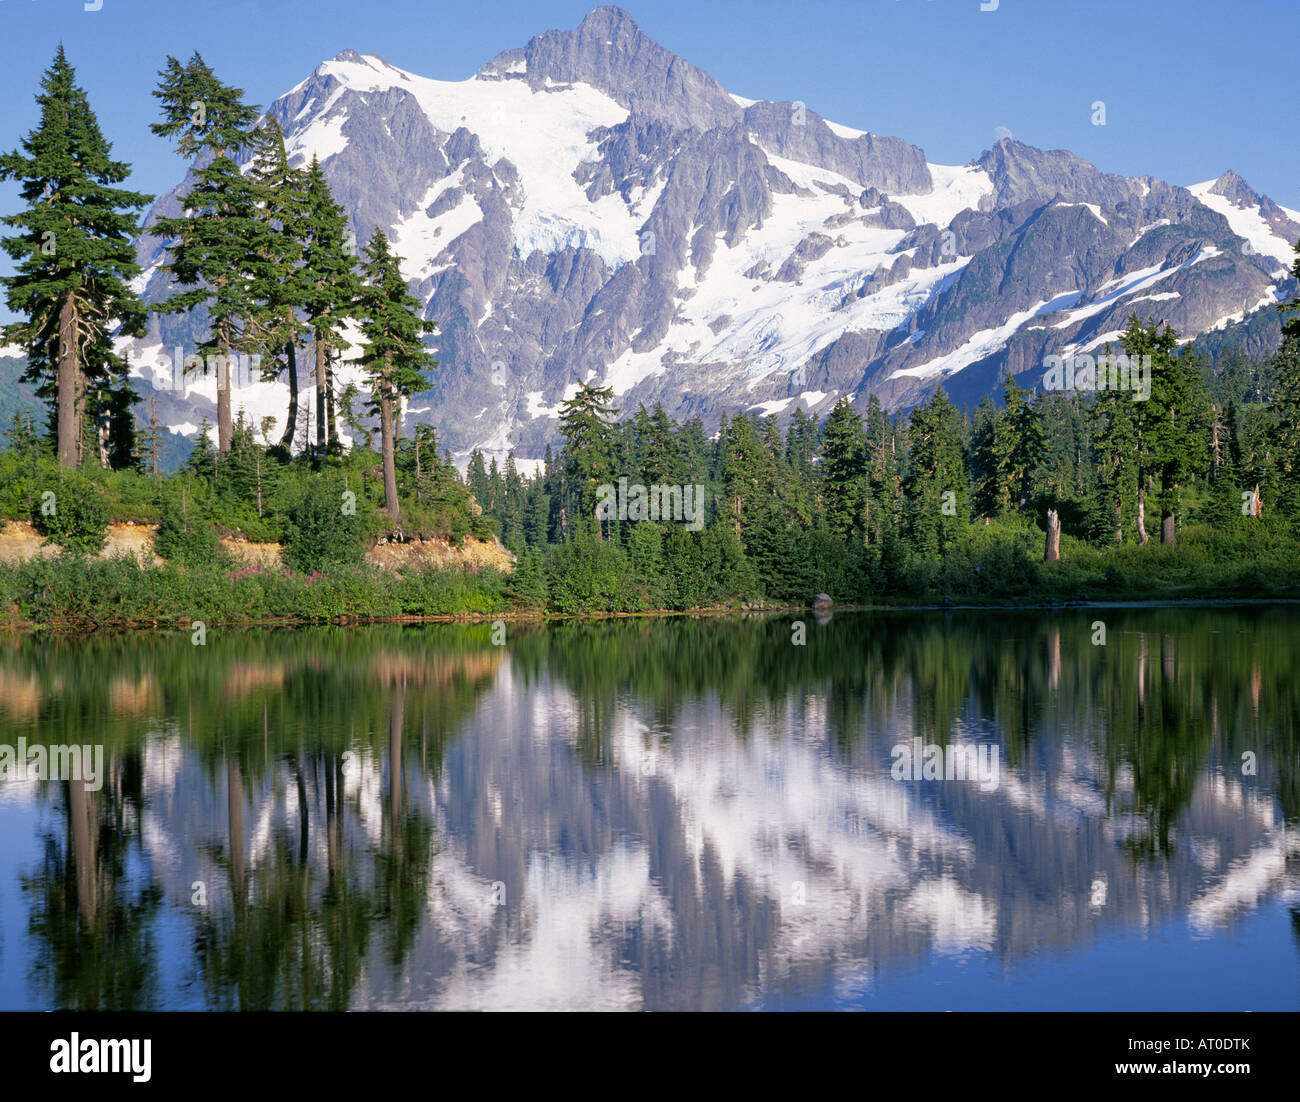 The reflection of Mount Shuksan in Picture Lake in the Cascade Mountains of North Cascades National Park, Washington. Stock Photo